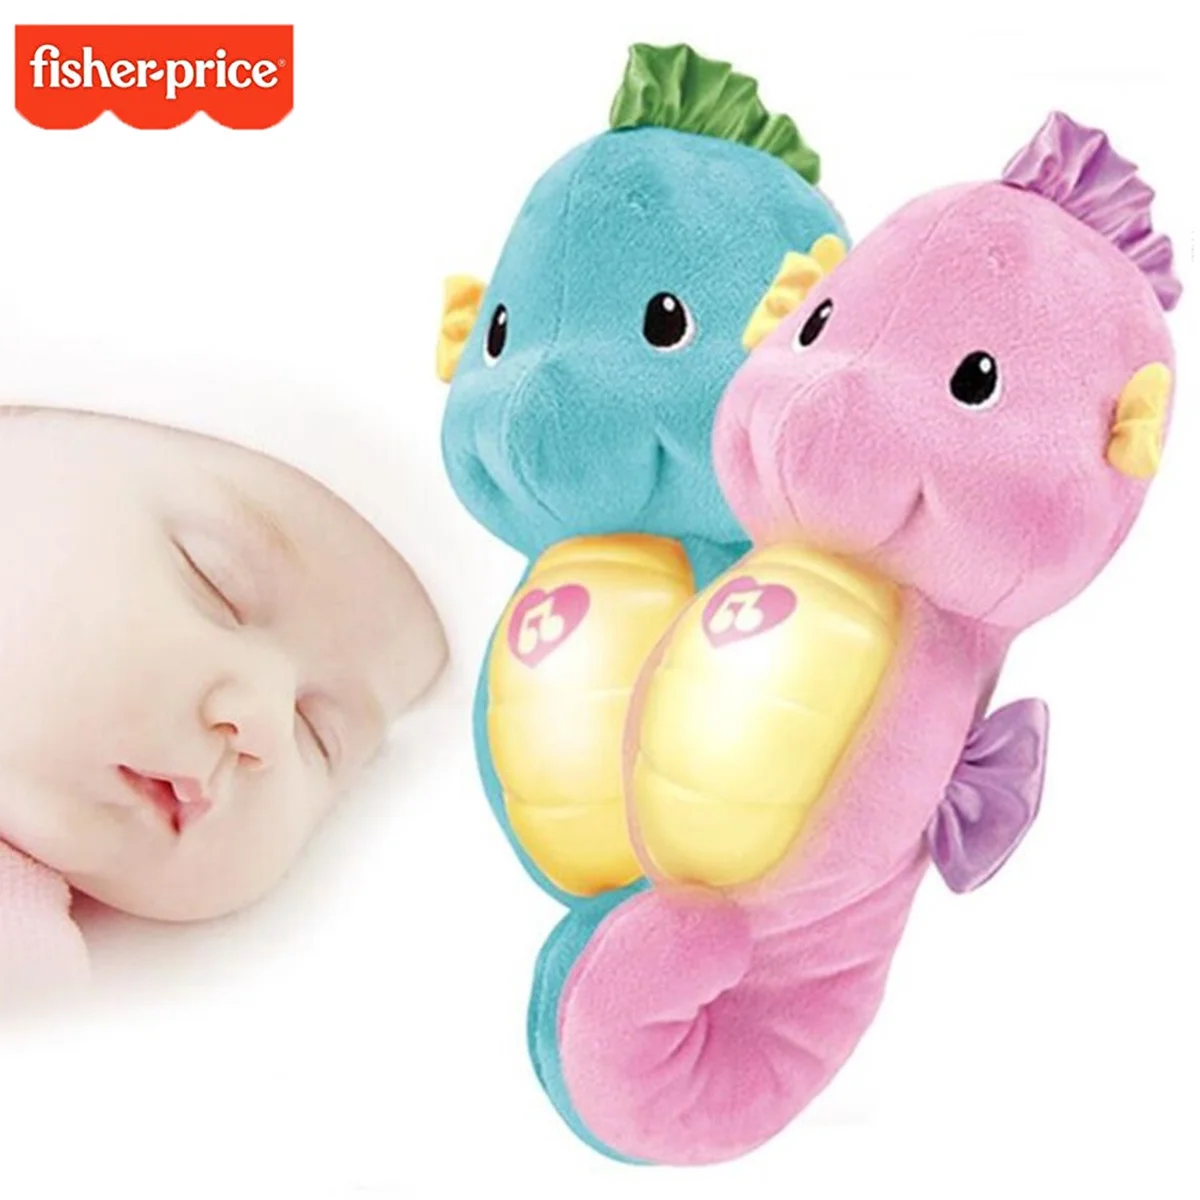 

Fisher-Price Soothe Glow Seahorse Musical on-the-Go Baby Dome Appease Toys Hippocampus Doll for Kids Gift DGH82